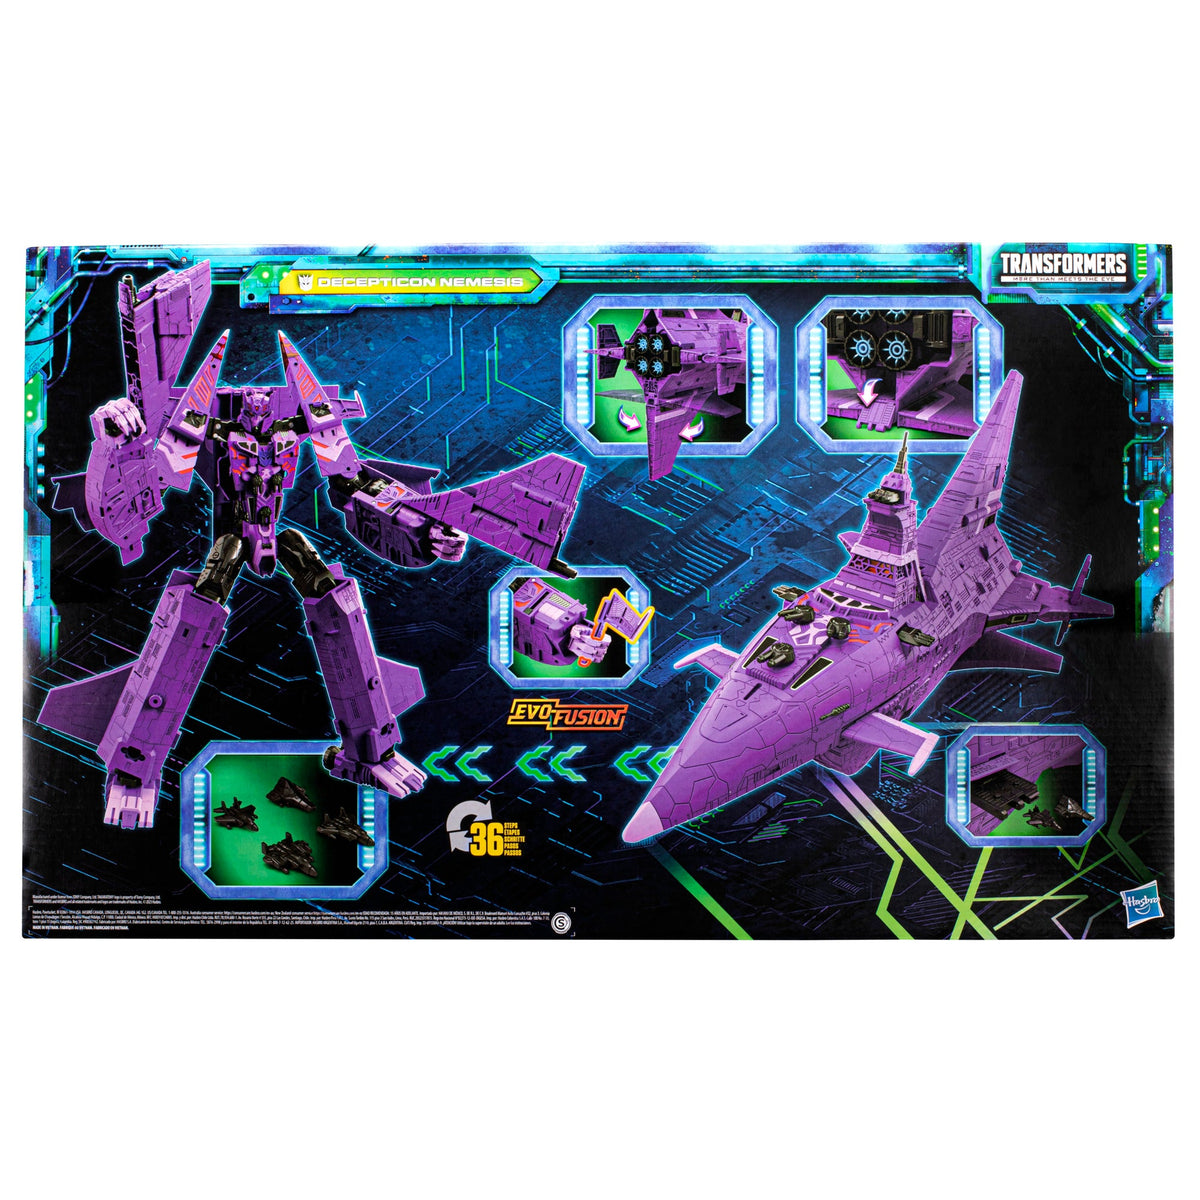 Transformers Micro Machines Playset Revealed